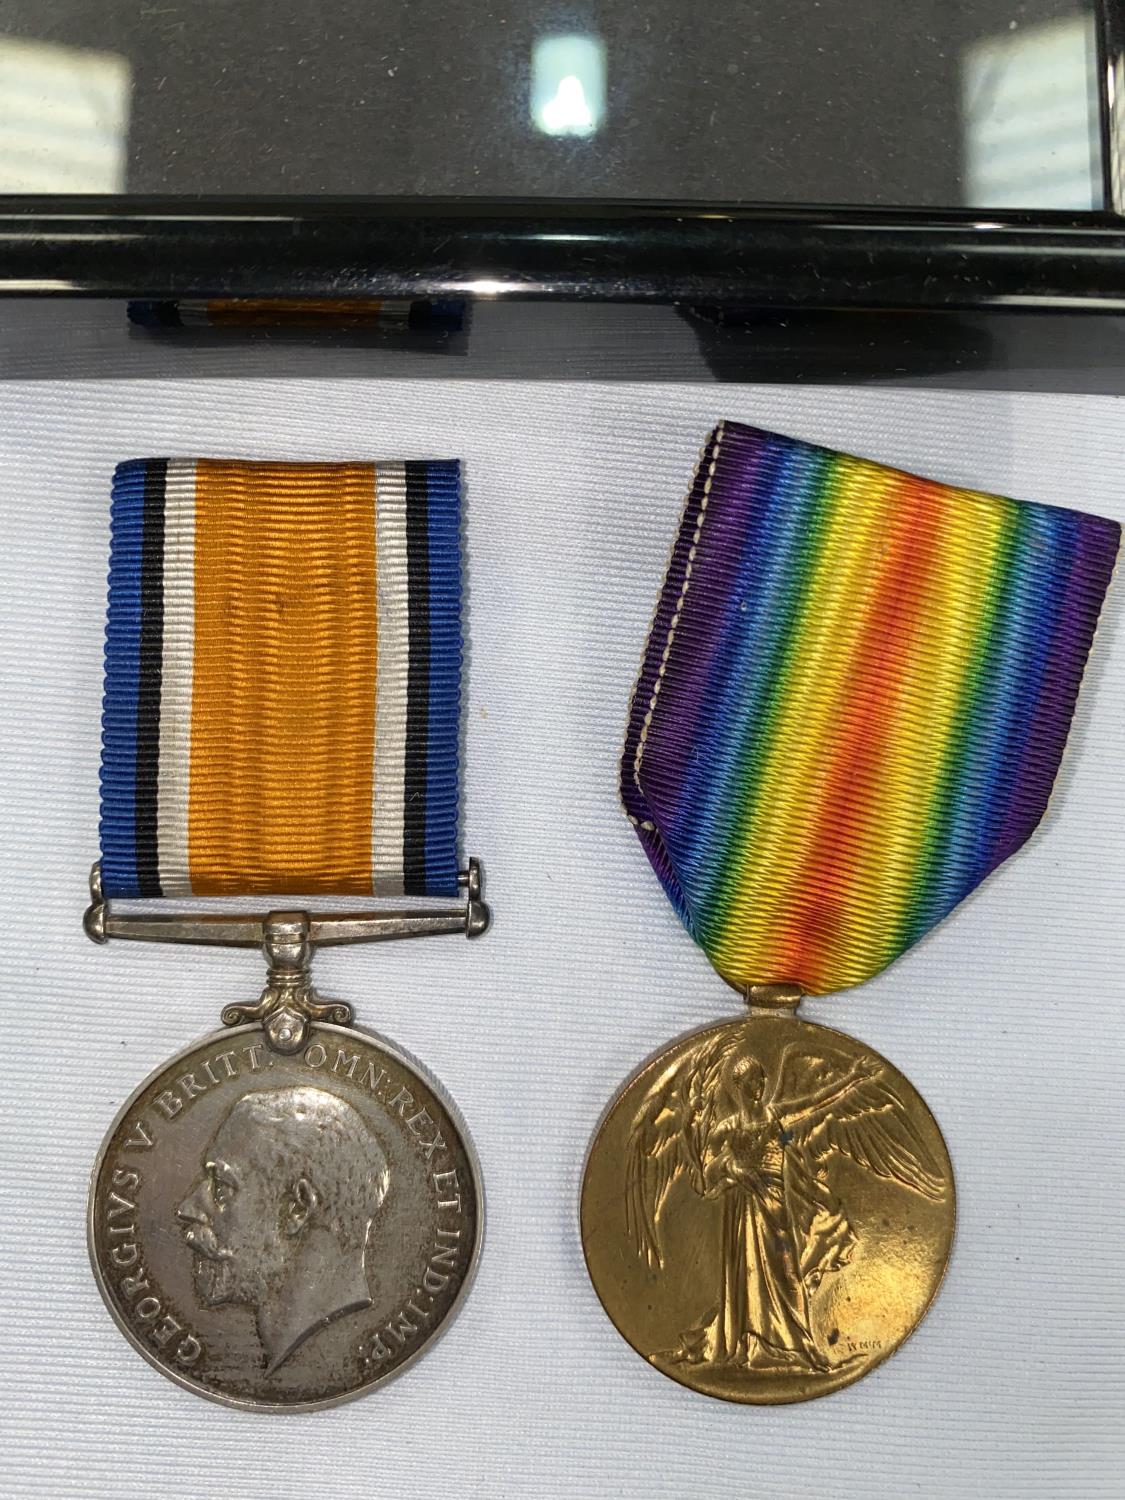 WWI medals in a frame, 480661 Cpl G H Carter R E